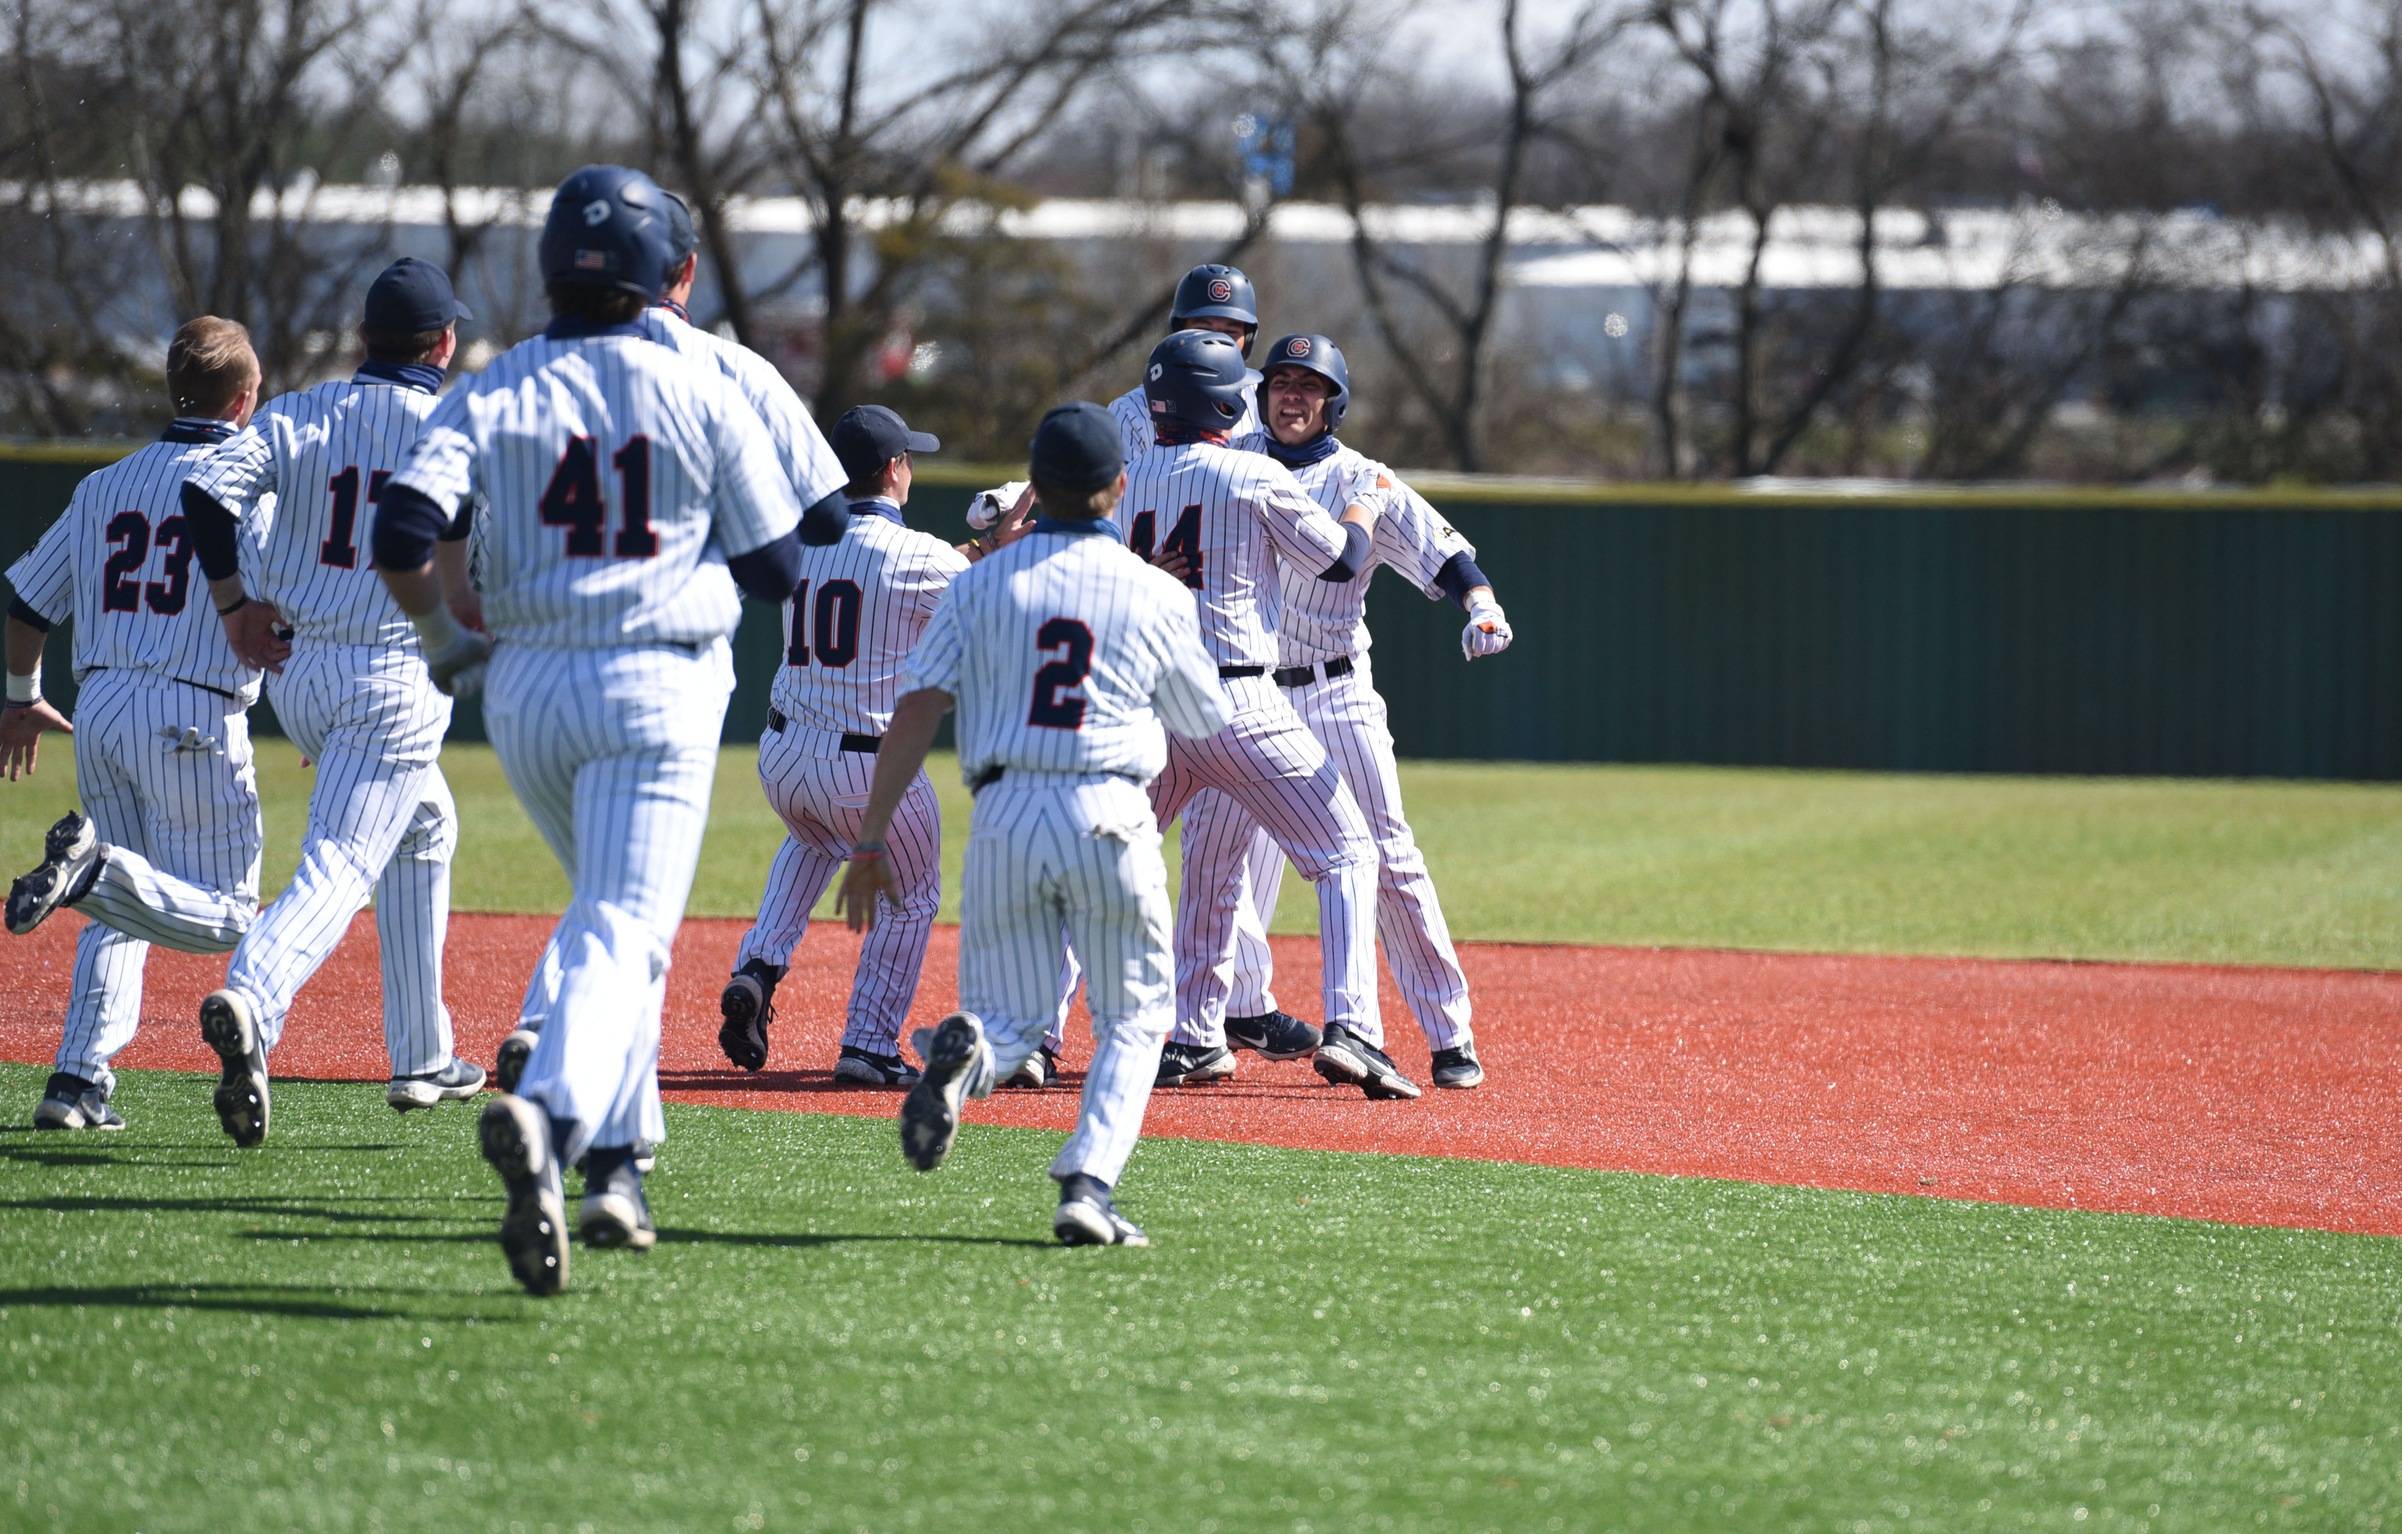 Walk-off, Coe’s strong start lead Eagles over Cavs